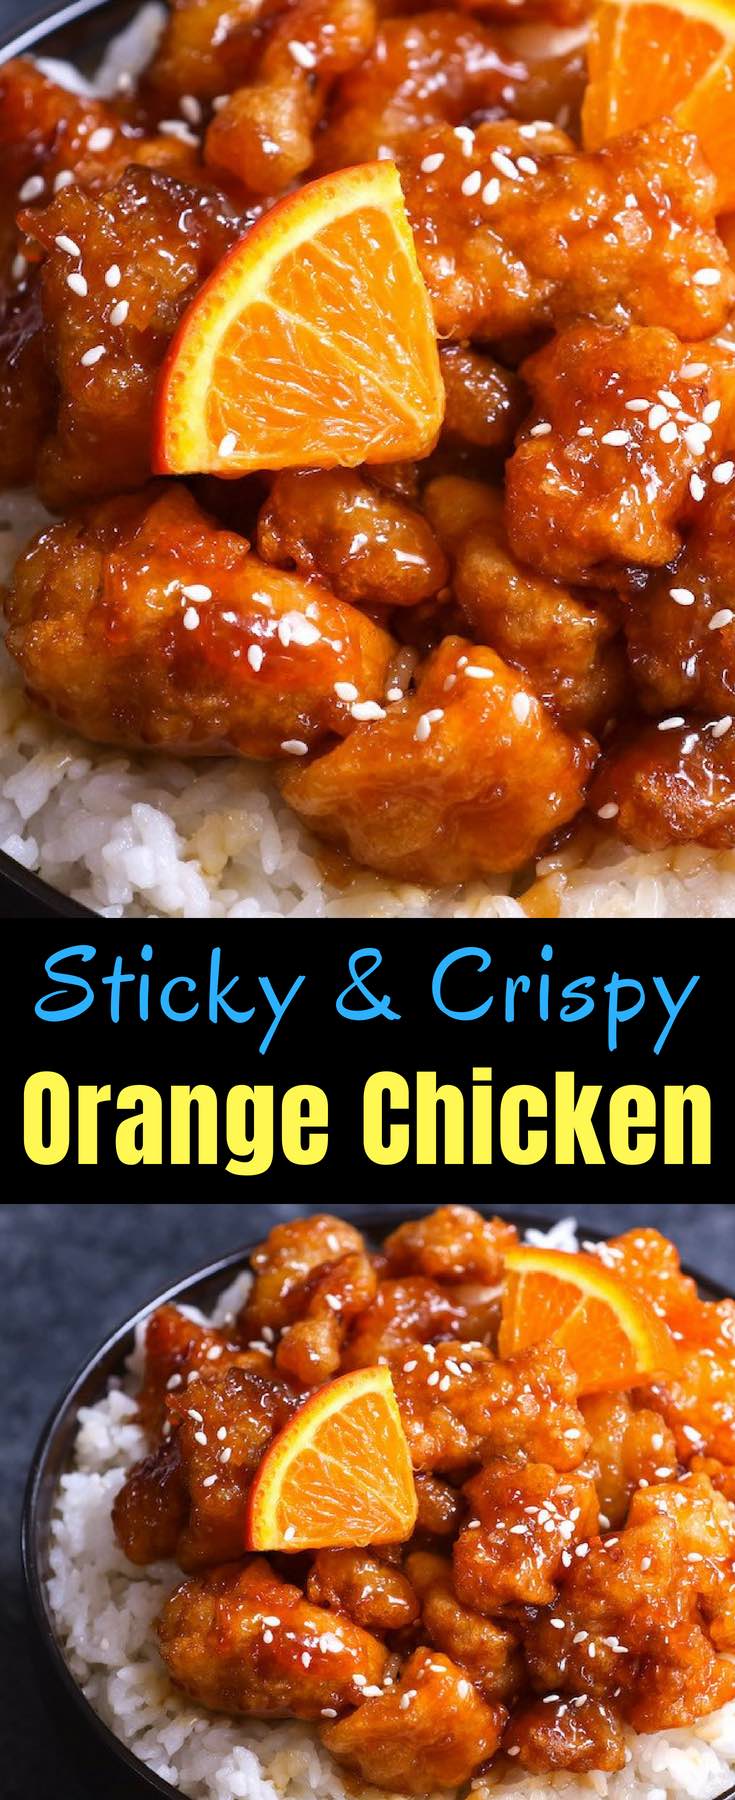 This Orange Chicken has crispy chunks of tender chicken covered in a tangy orange sauce. It makes a delicious weeknight dinner that’s budget friendly and kid approved. So skip the takeout from Panda Express and try this orange chicken recipe!